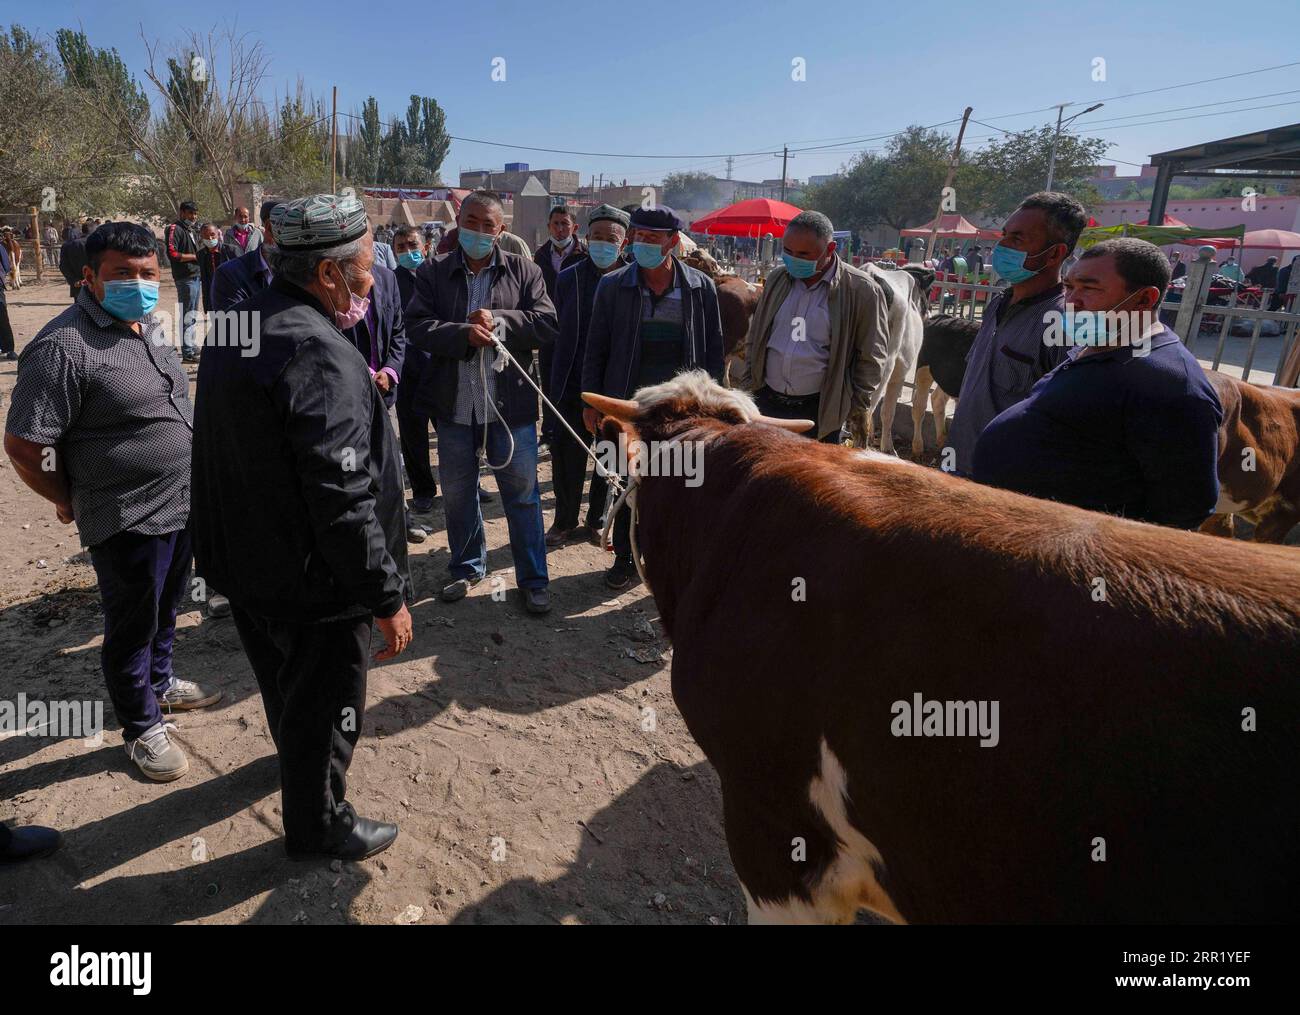 200926 -- SHUFU, Sept. 26, 2020 -- Villagers purchase cattle at a bazaar in a town of Shufu County, northwest China s Xinjiang Uygur Autonomous Region, Sept. 21, 2020. A cattle and sheep bazaar is held at the town in Shufu.  CHINA-XINJIANG-SHUFU-CATTLE-SHEEP-BAZAAR CN ZhaoxGe PUBLICATIONxNOTxINxCHN Stock Photo